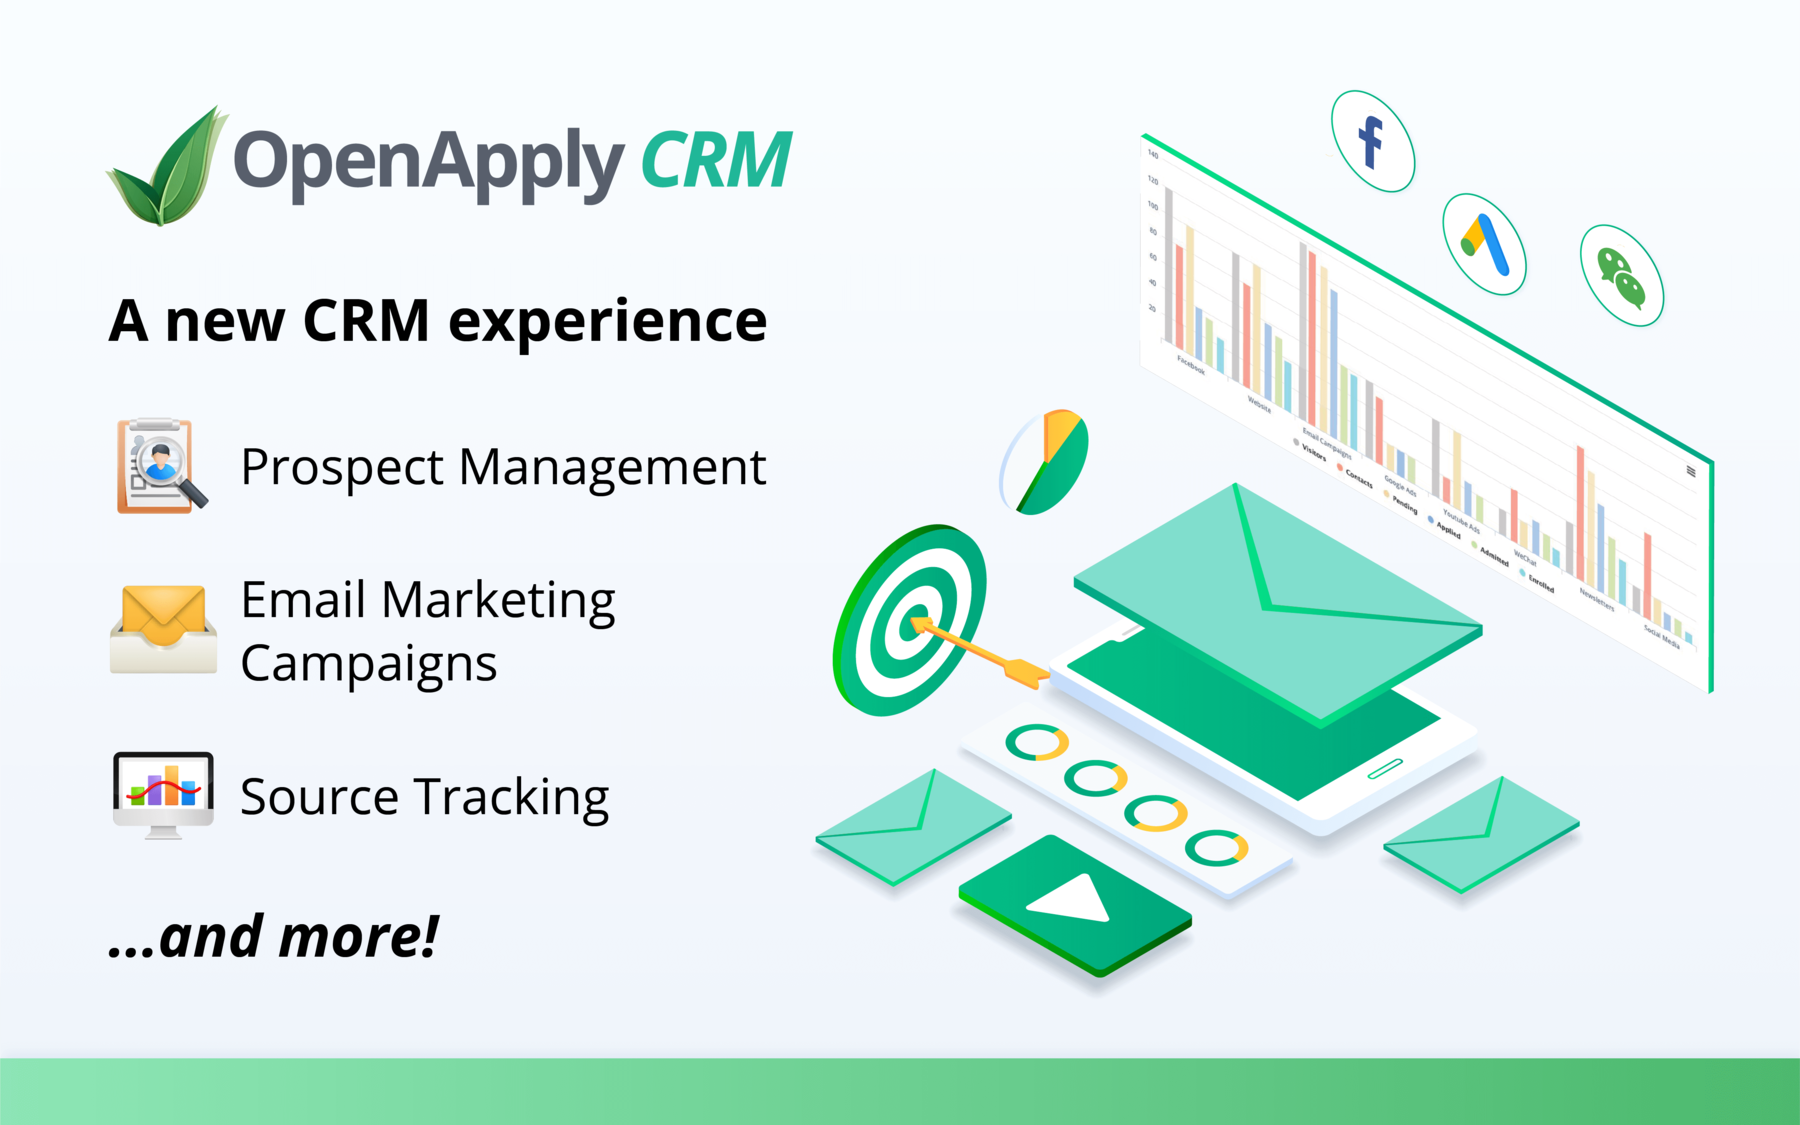 Introducing OpenApply CRM!